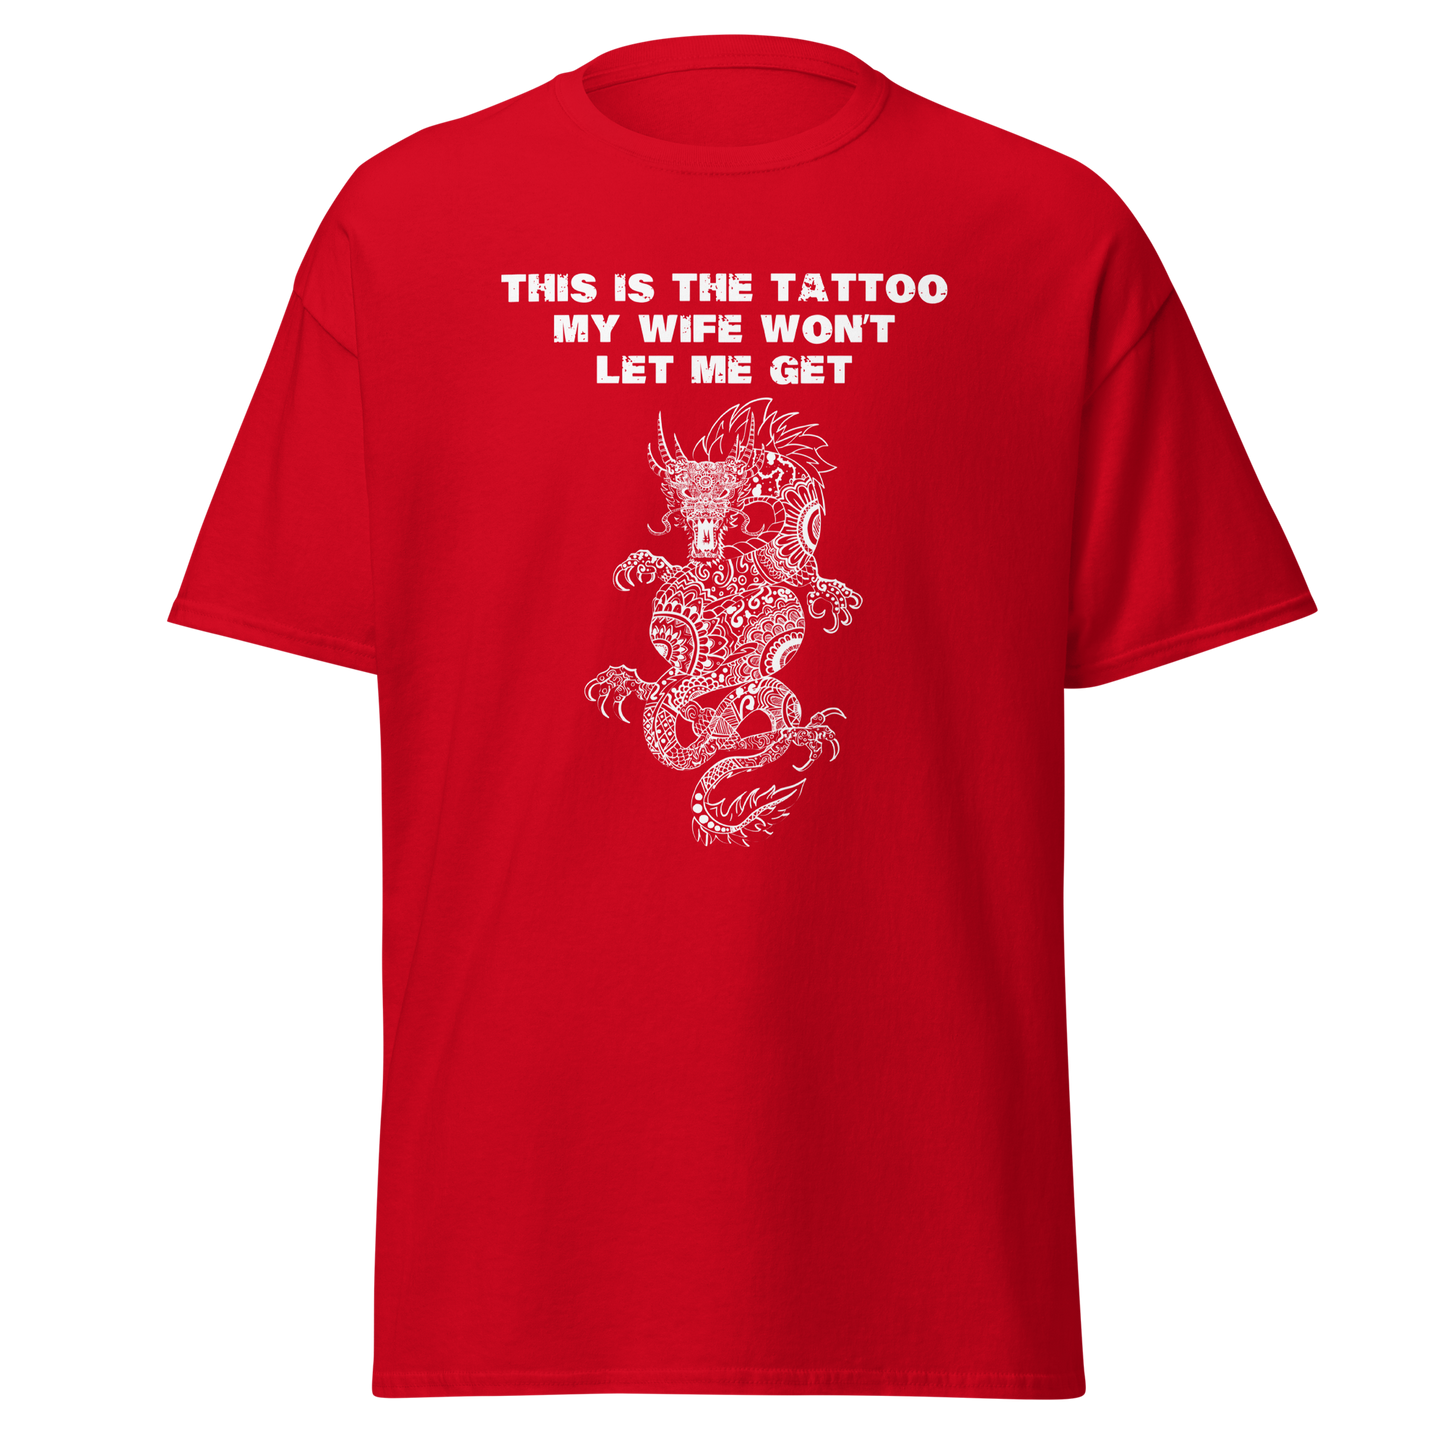 Dragon Tattoo Shirt: This is the Tattoo My Wife Won't Let Me Get - Funny Tee for Tattoo Lovers